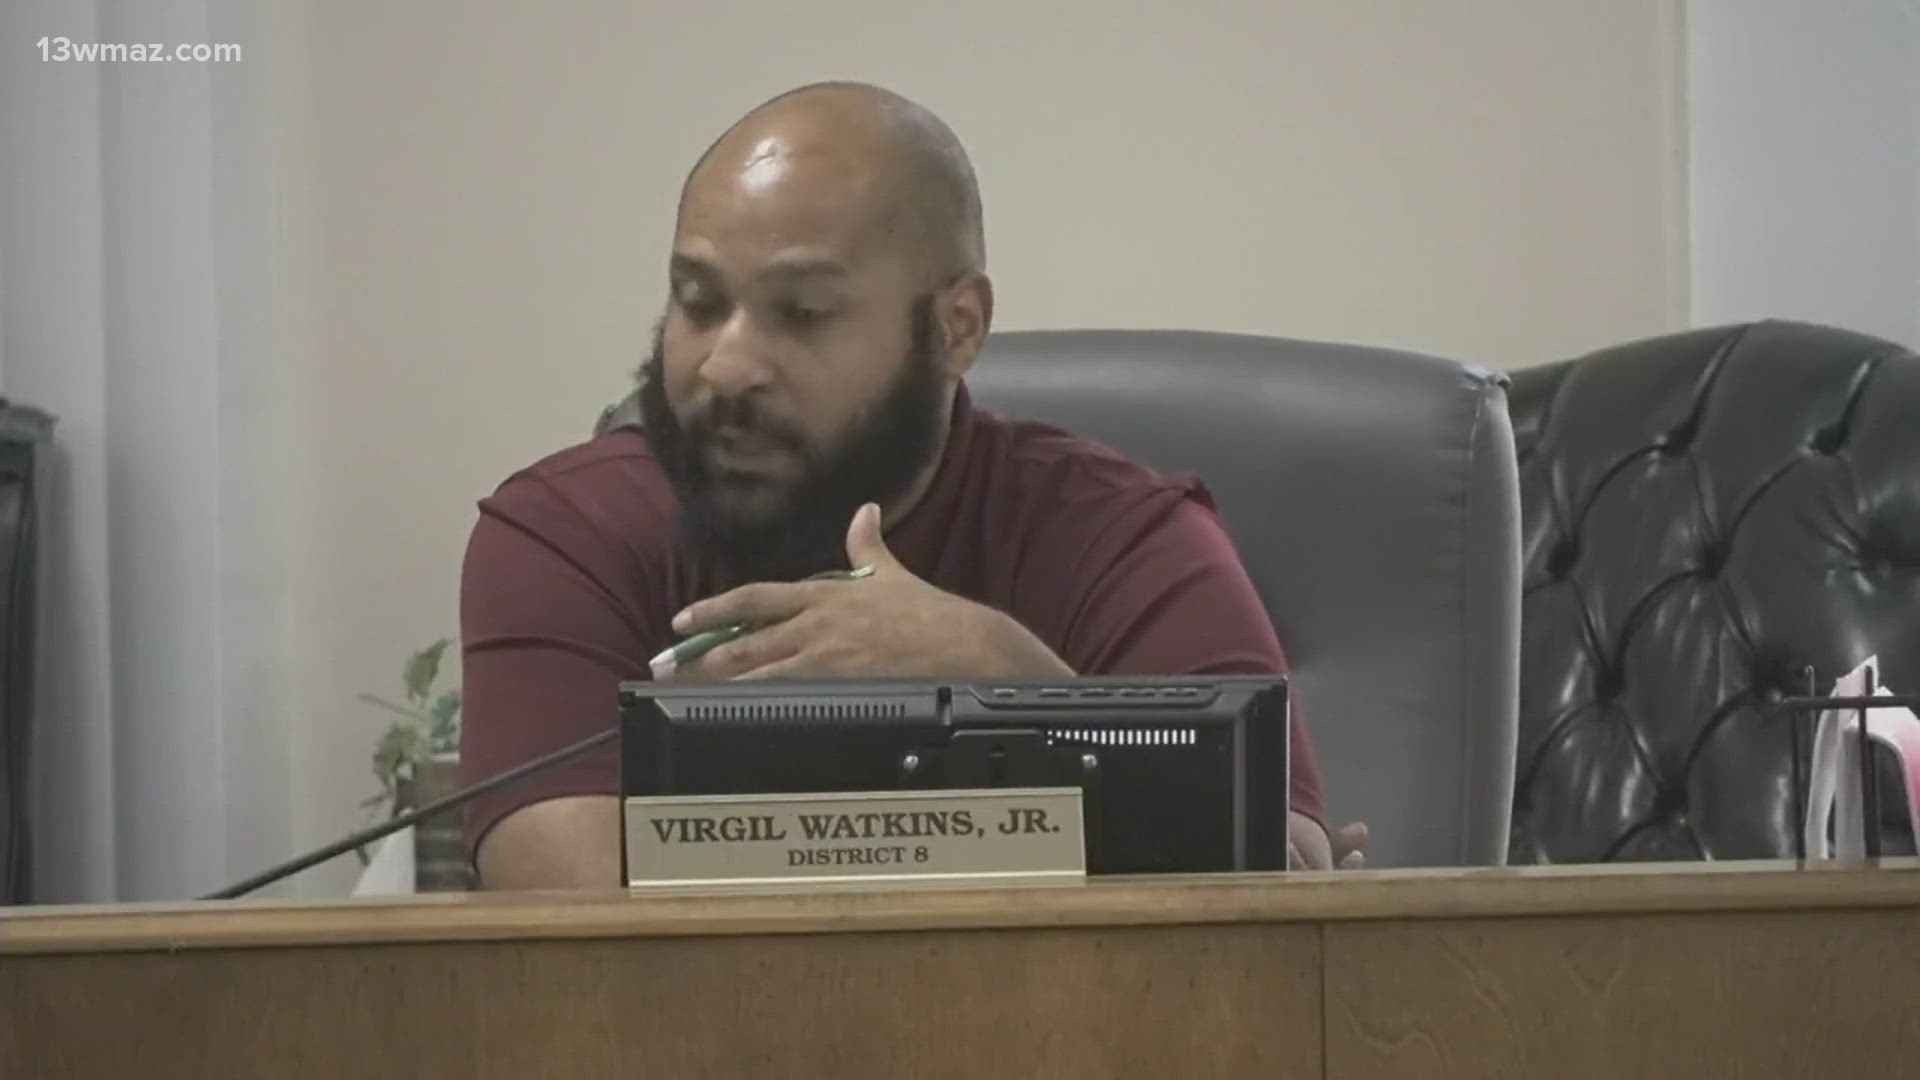 Commissioner Virgil Watkins introduced the ordinance that fines alleged violators up-front, rather than requiring a court appearance.